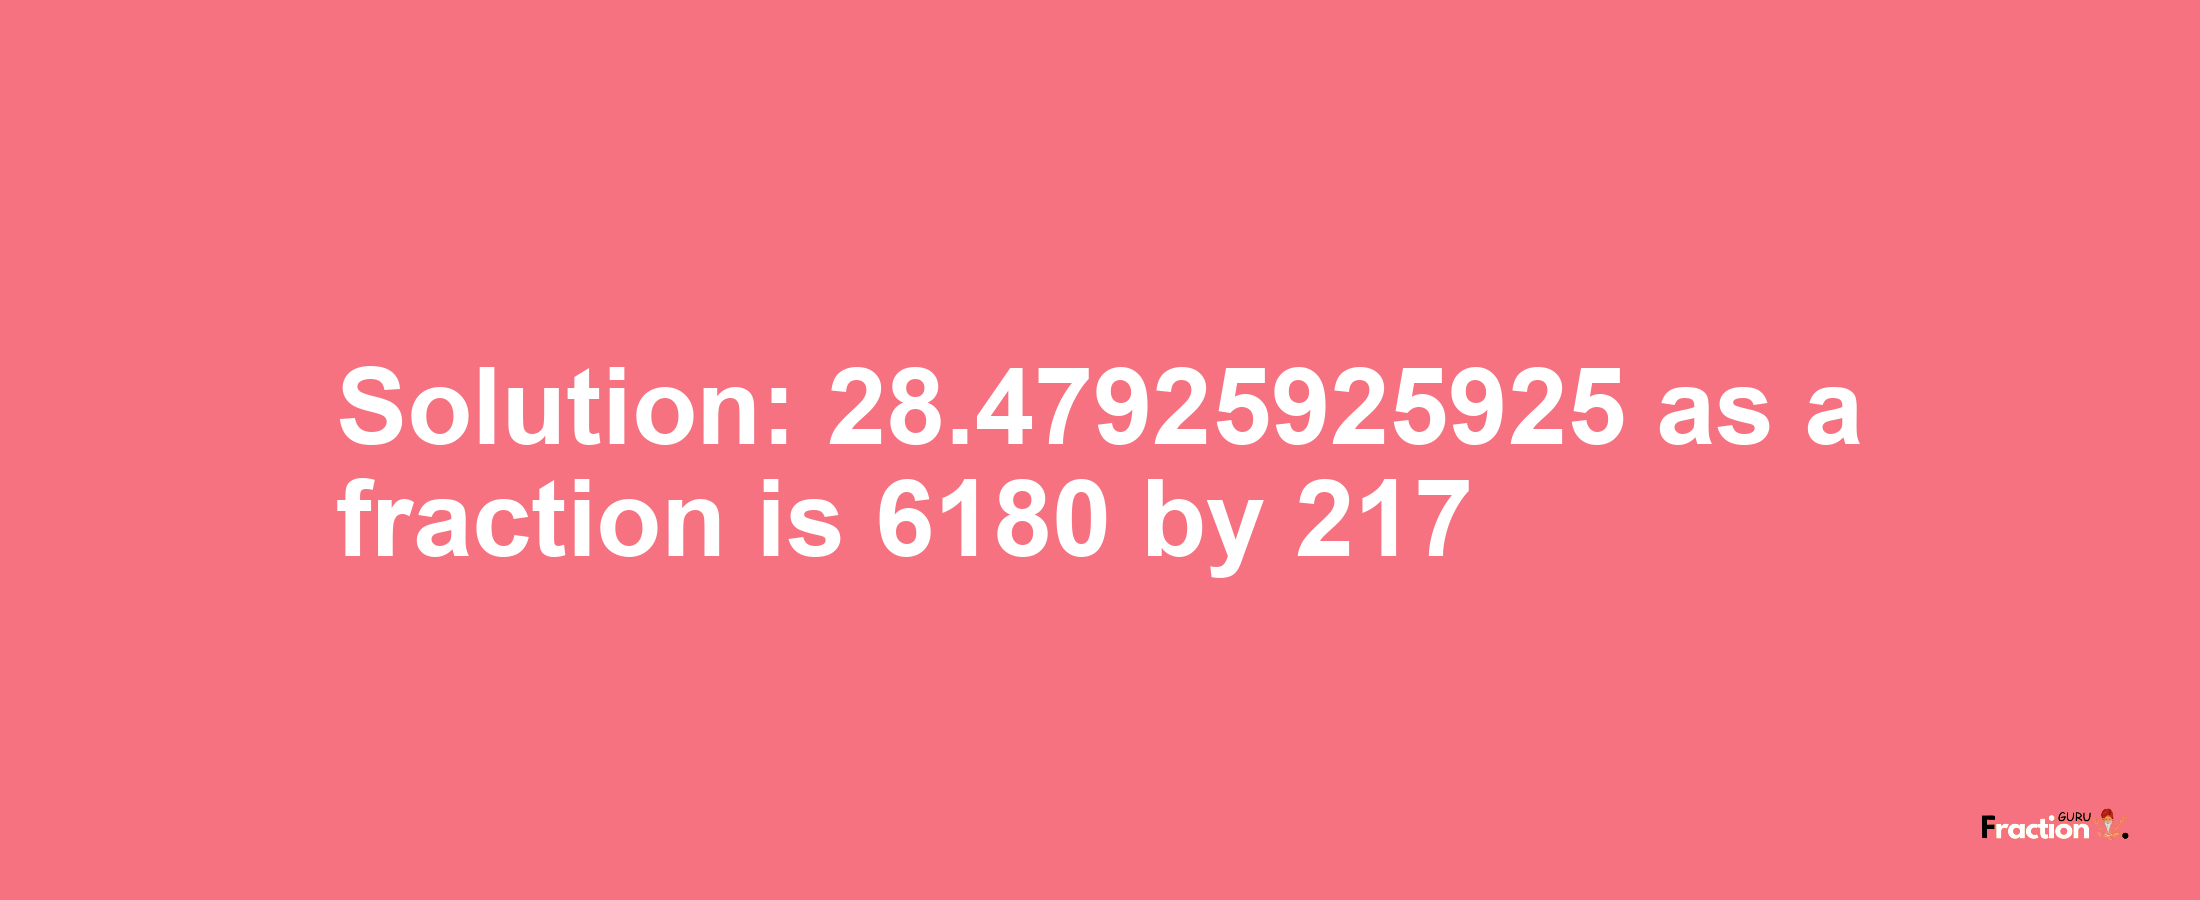 Solution:28.47925925925 as a fraction is 6180/217